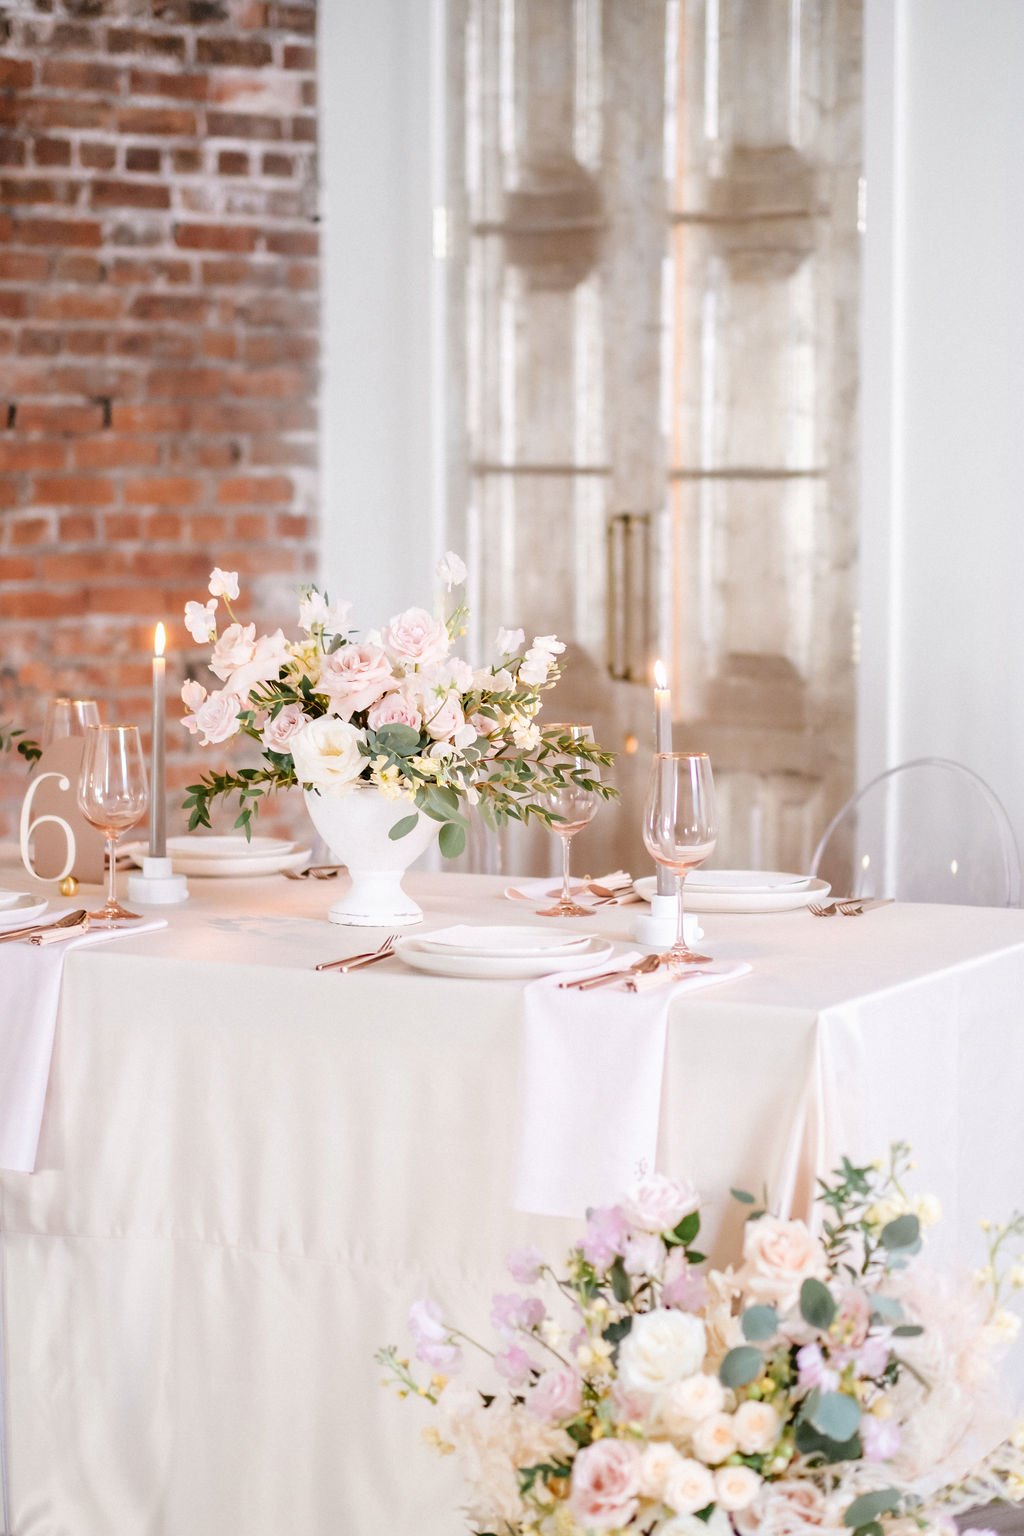 Contemporary wedding inspiration at Venue 308 in Calgary Alberta featuring pink and cream florals